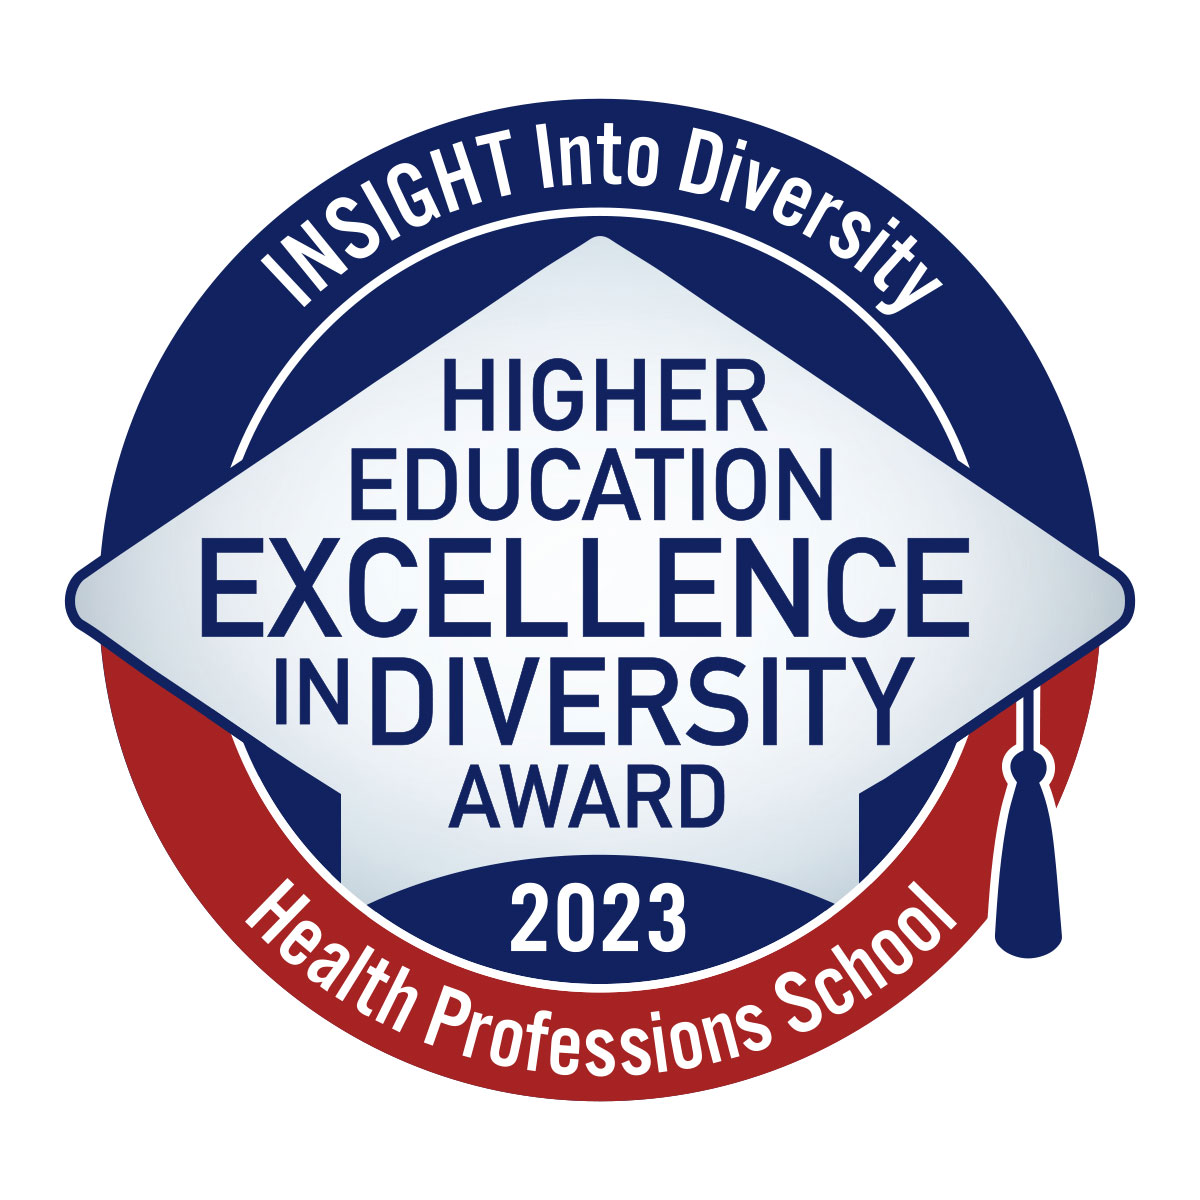 Higher Education Excellence in Diversity Award 2022